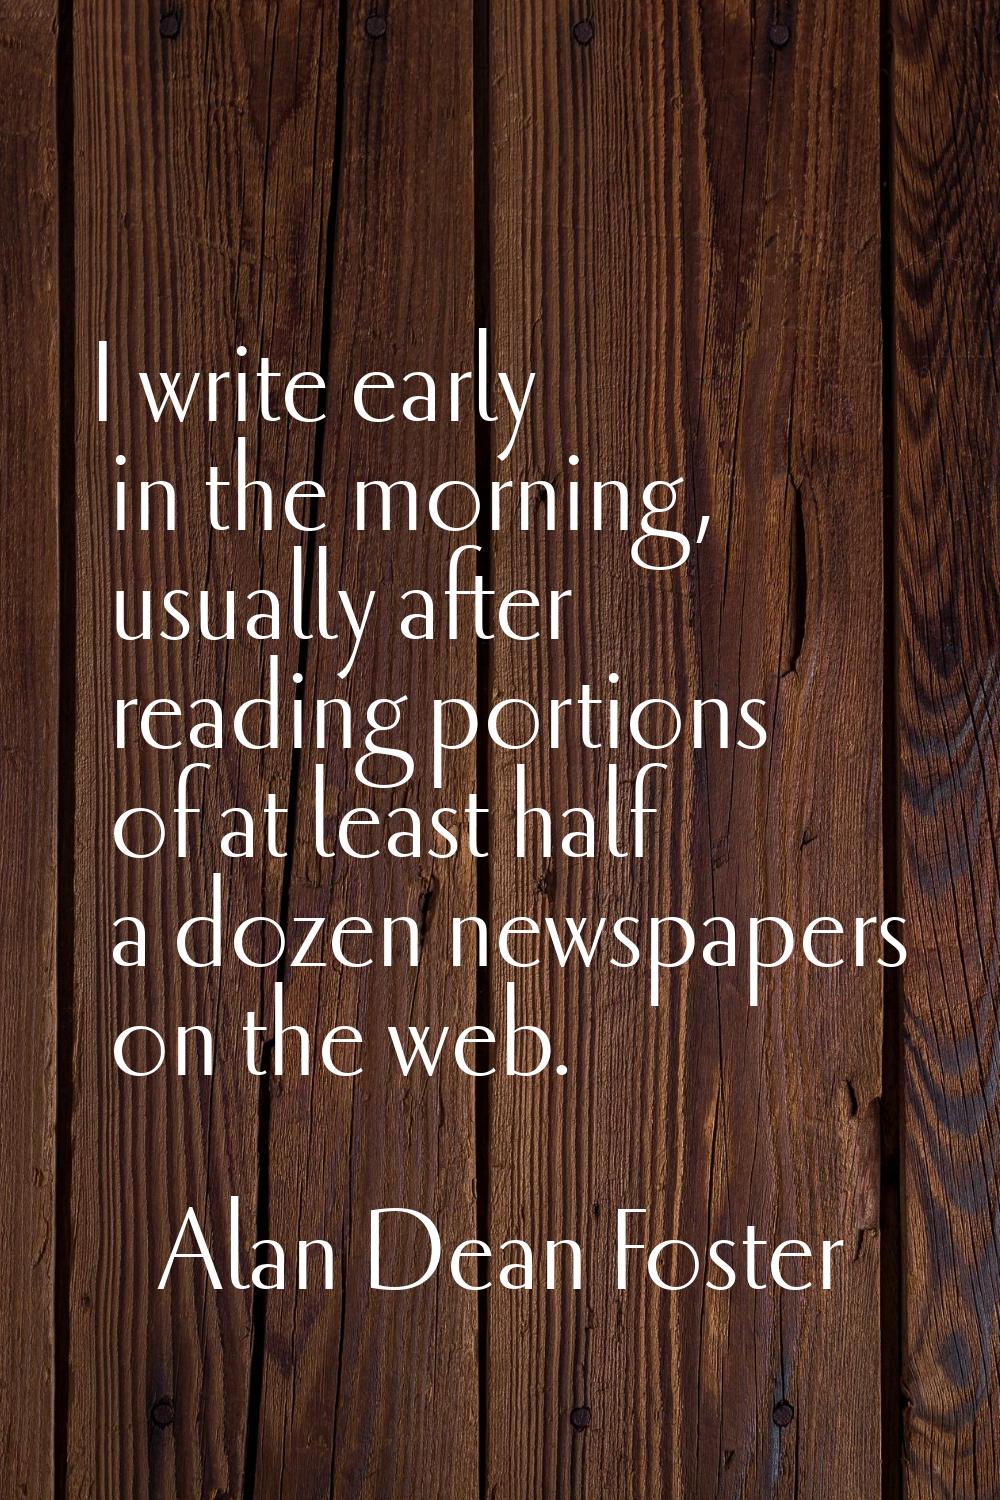 I write early in the morning, usually after reading portions of at least half a dozen newspapers on